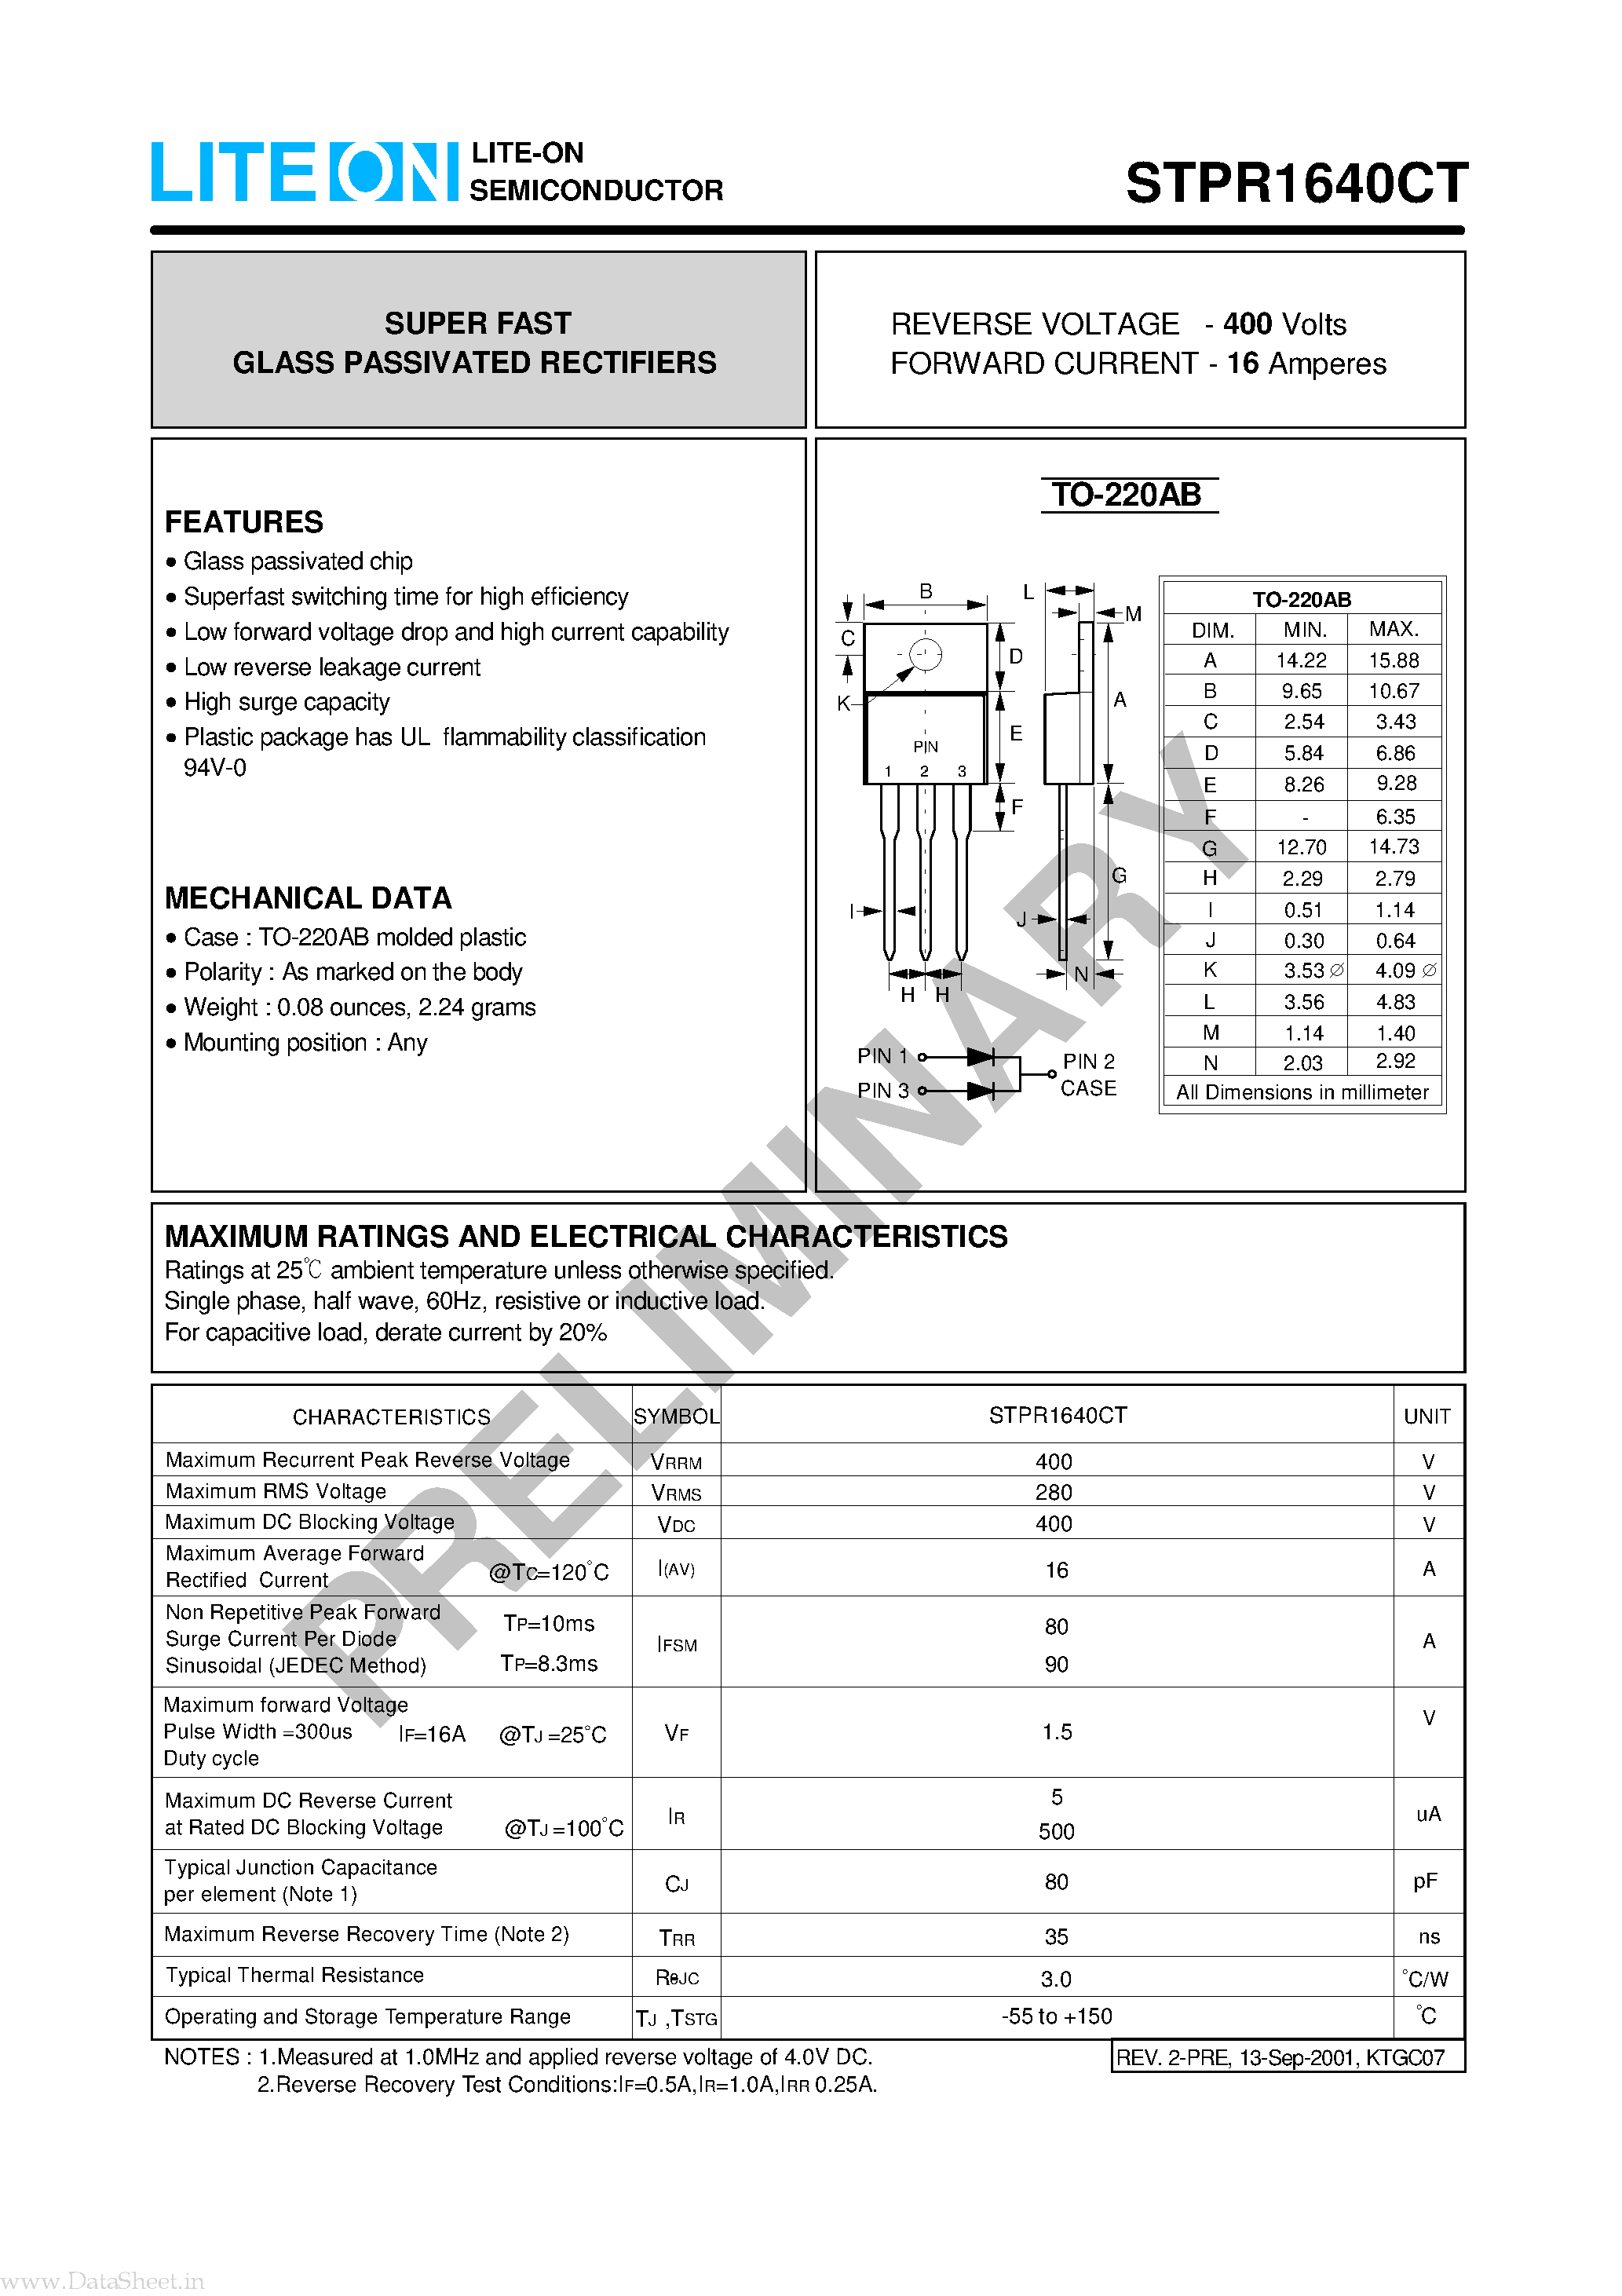 Datasheet STPR1640CT - SUPER FAST GLASS PASSIVATED RECTIFIERS page 1